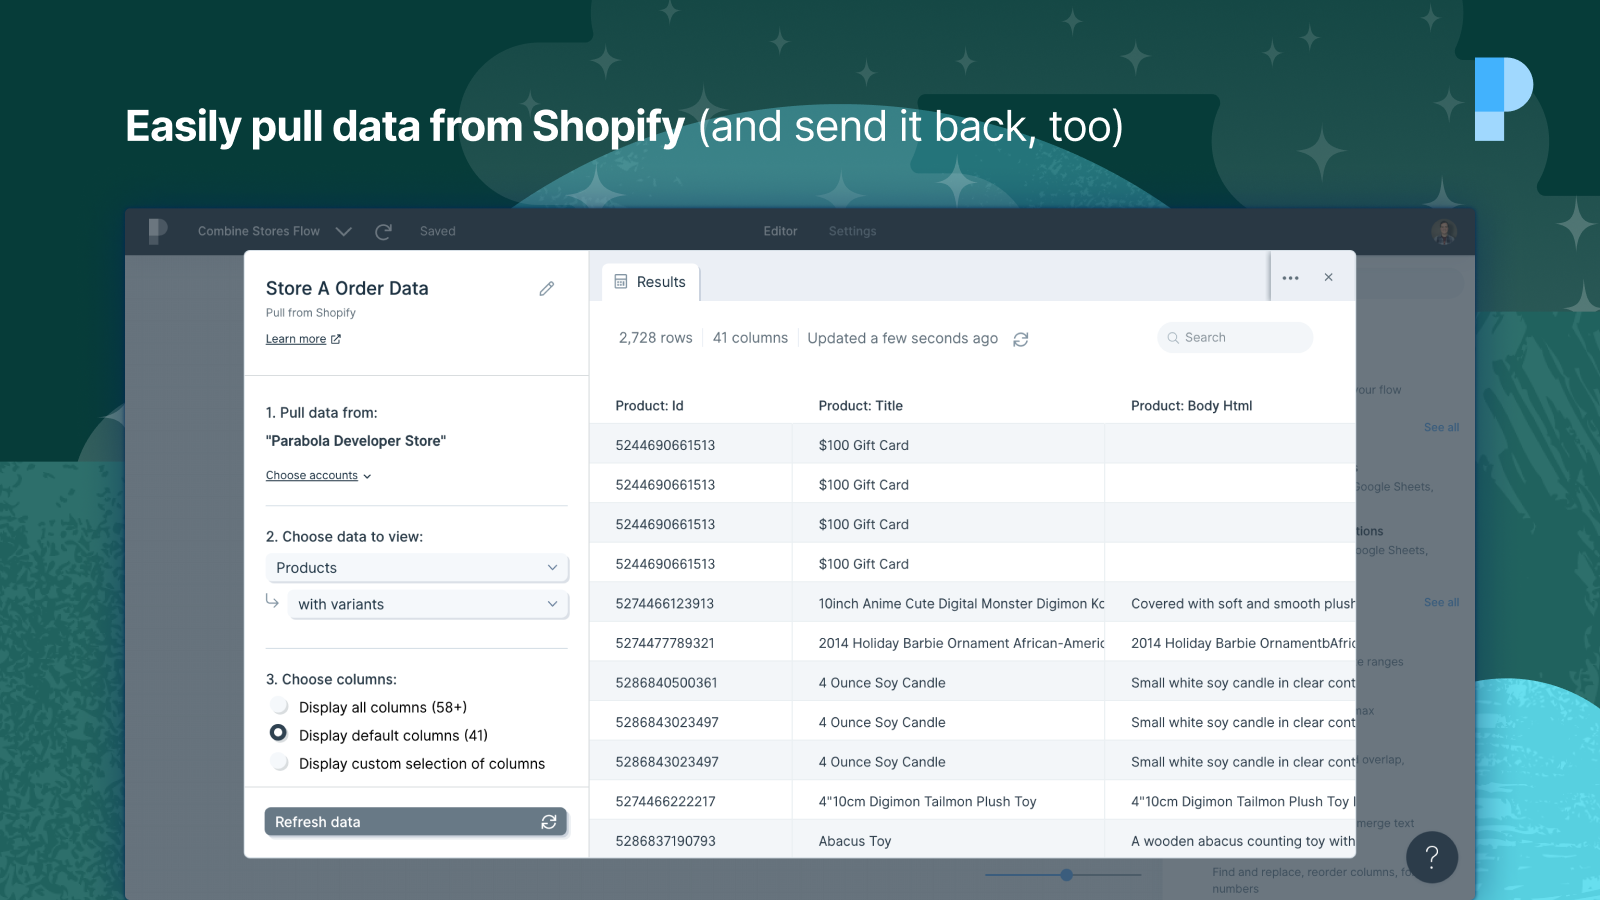 Easily pull data from Shopify (and send it back, too)